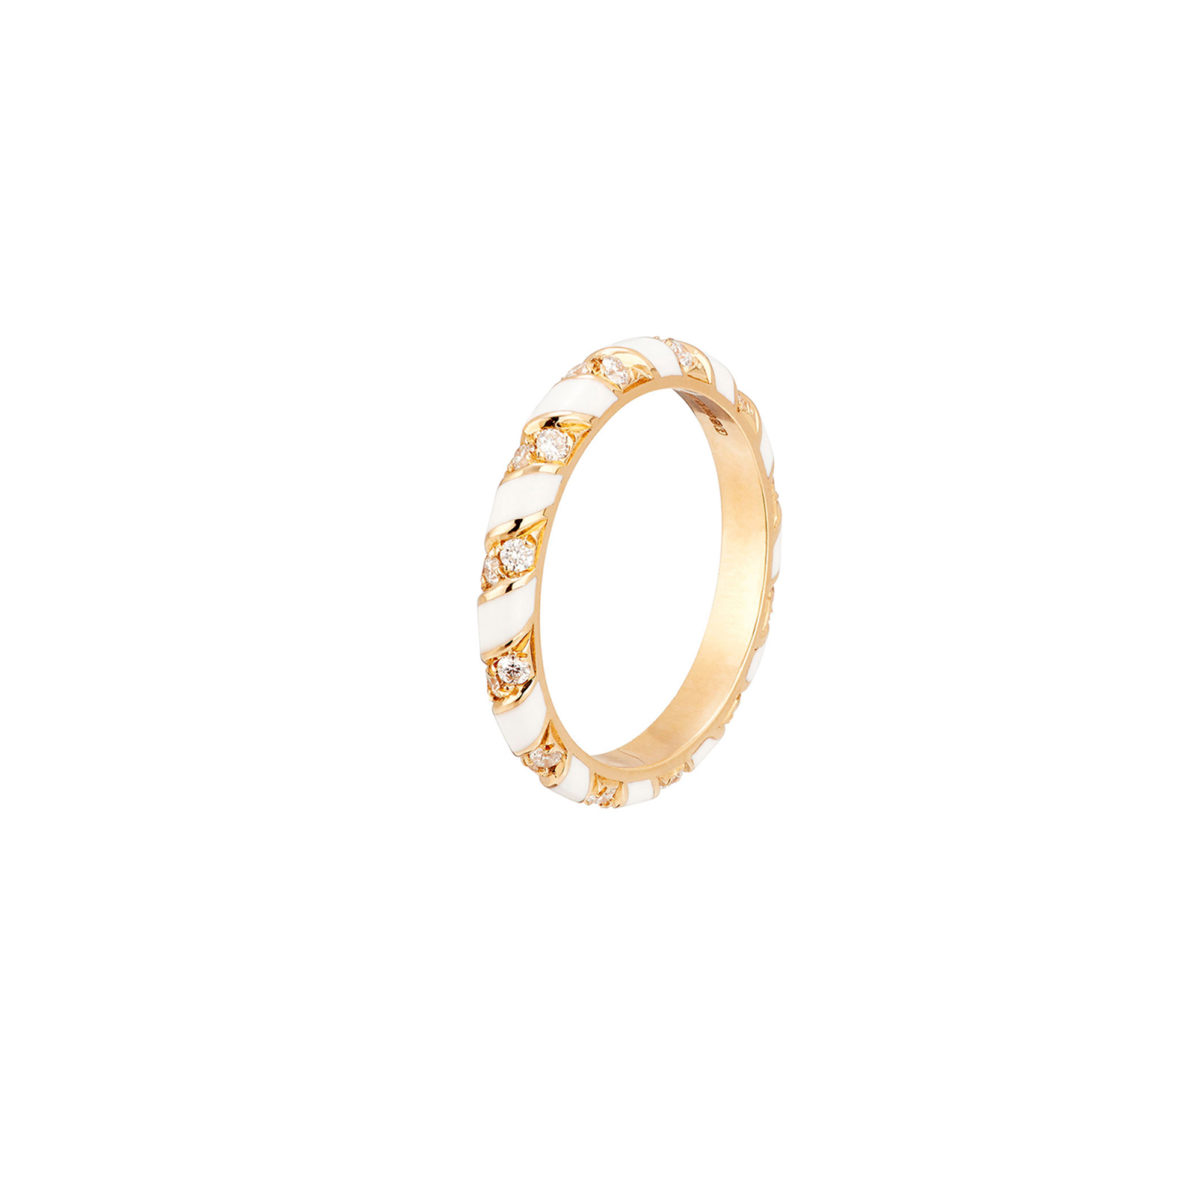 Explore Alice Cicolini's Jewelry - Rings and Earrings – Objet d'Emotion